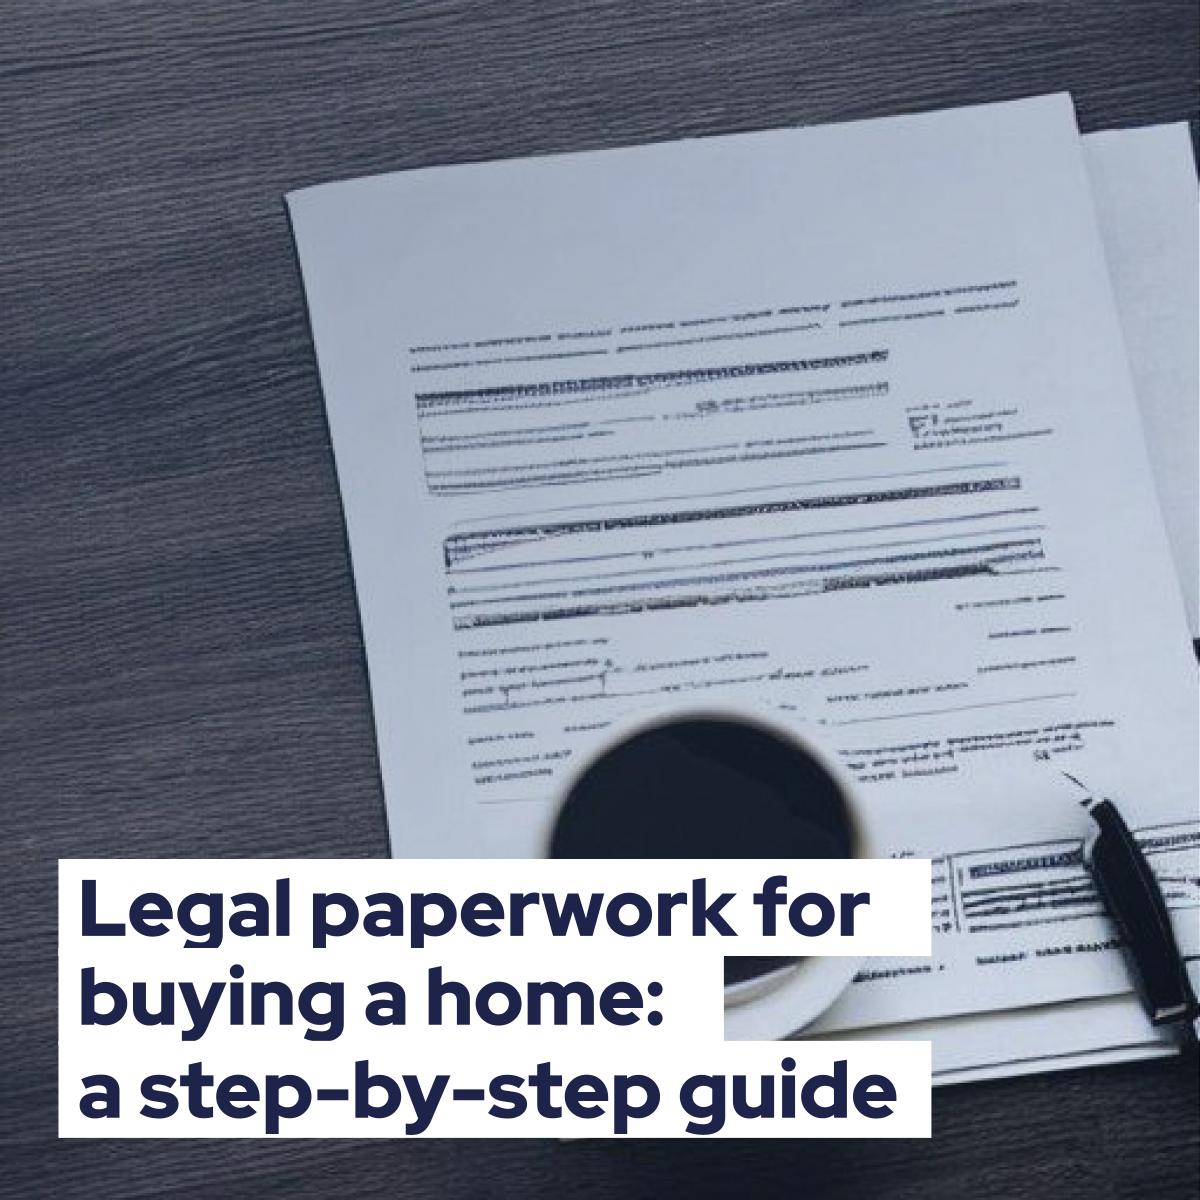 Legal paperwork for buying a home a step-by-step guide